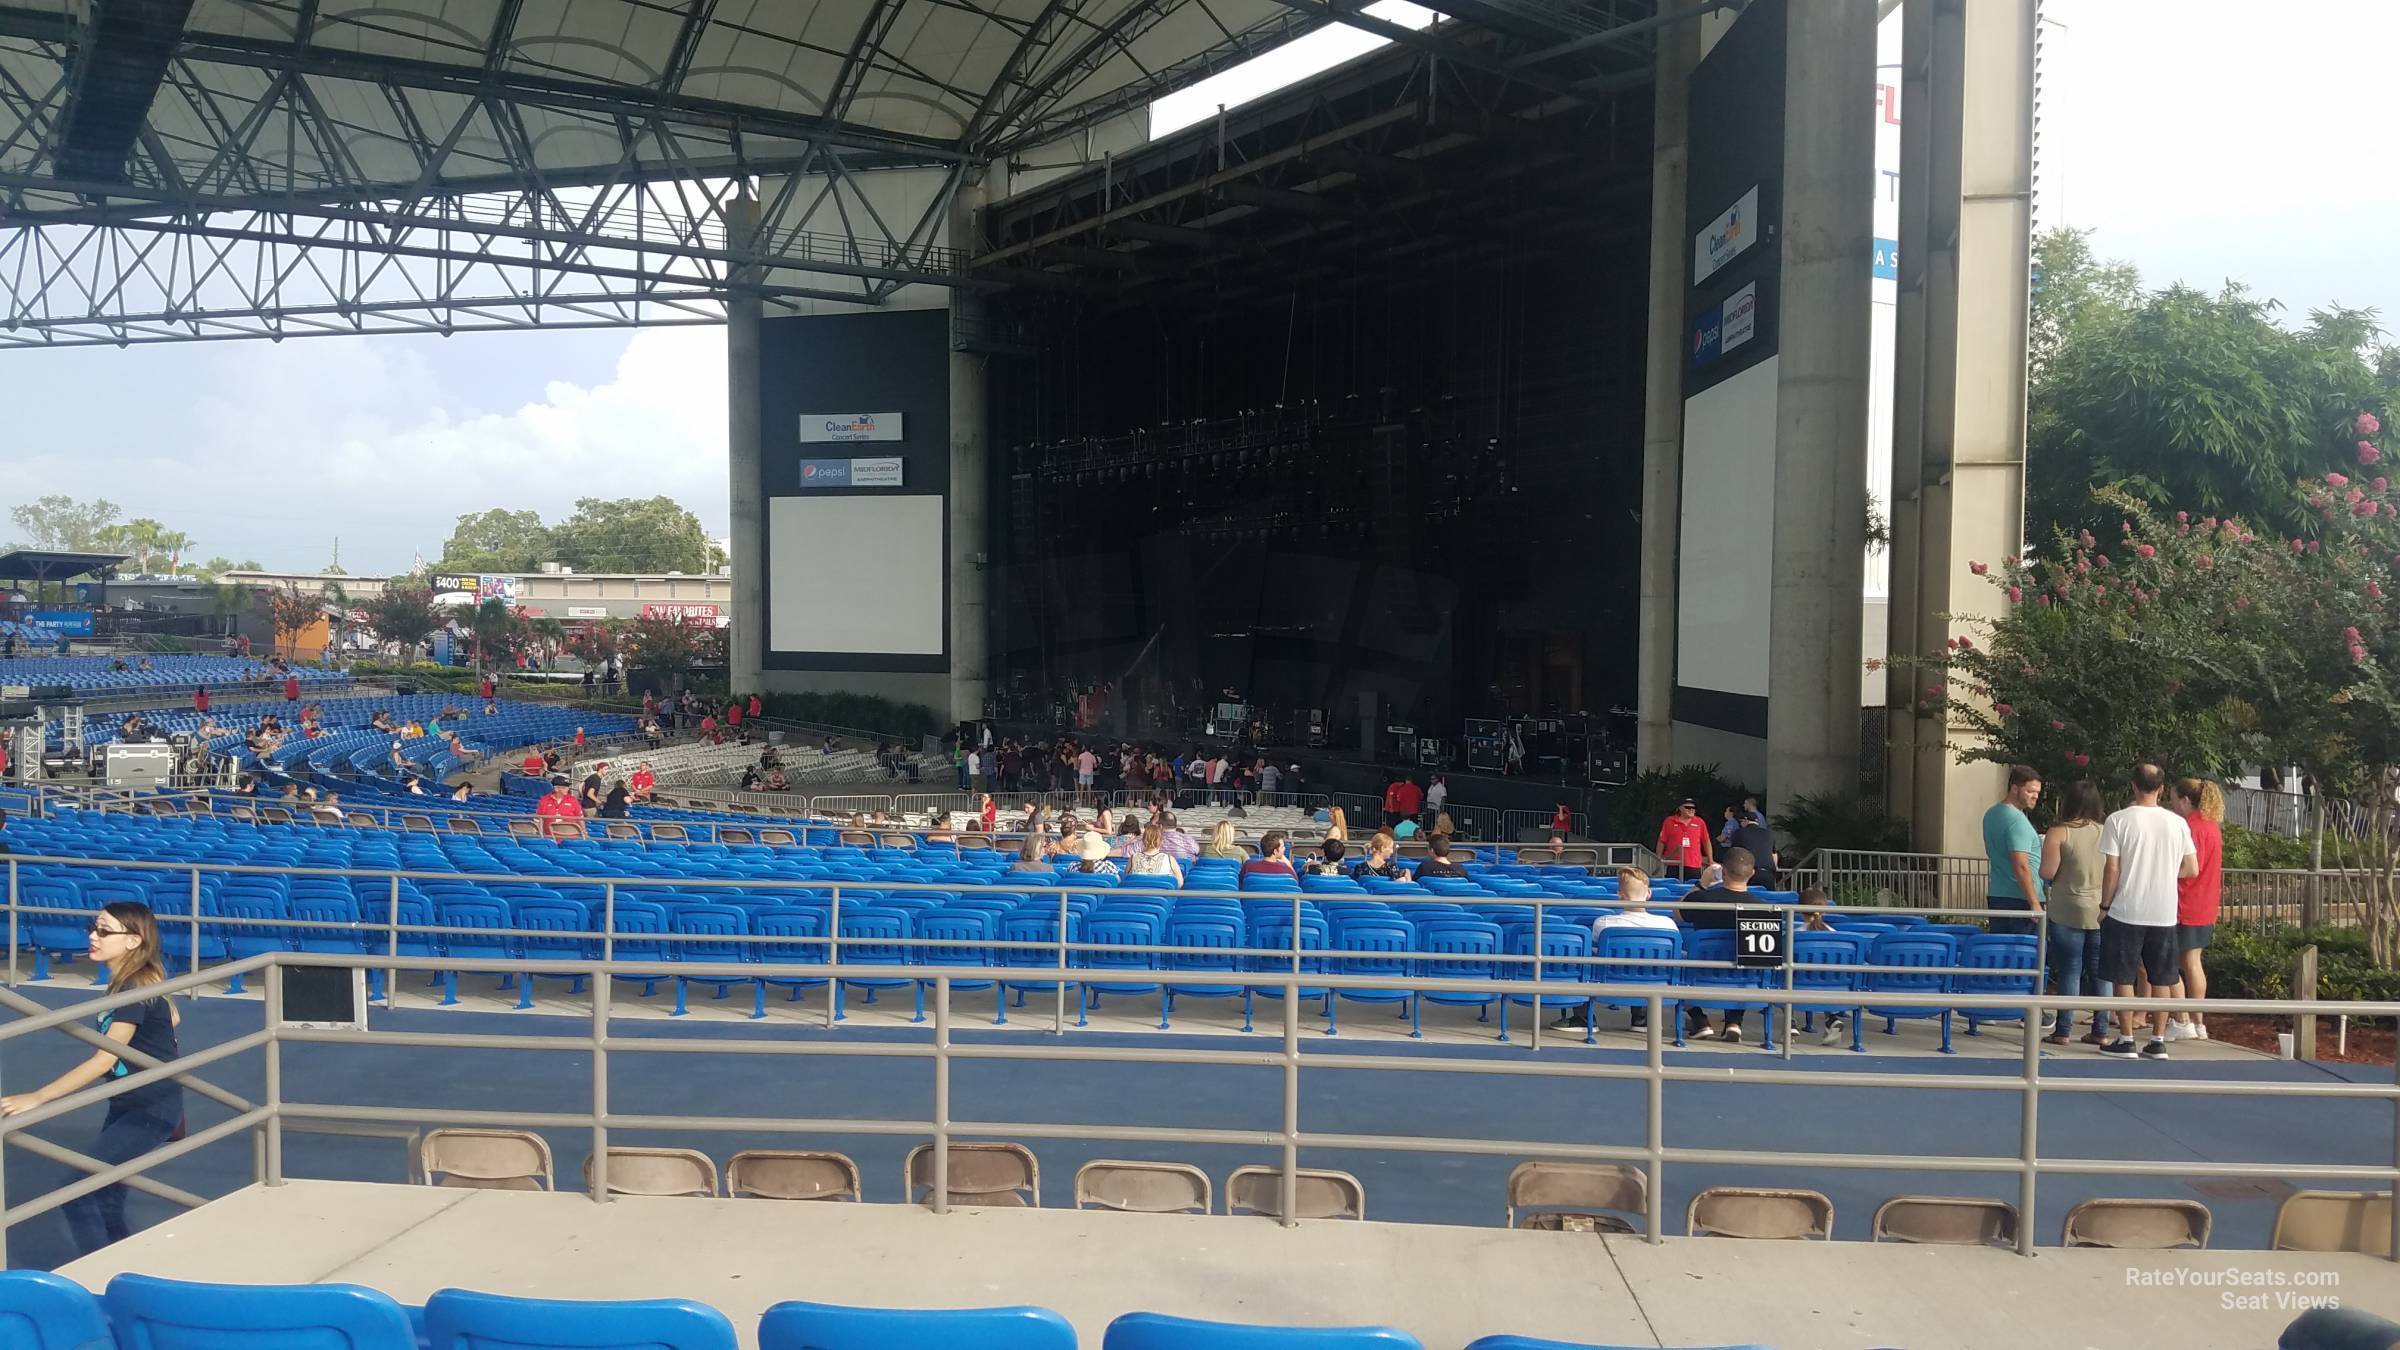 Mid Florida Amphitheater Seating Chart With Seat Numbers